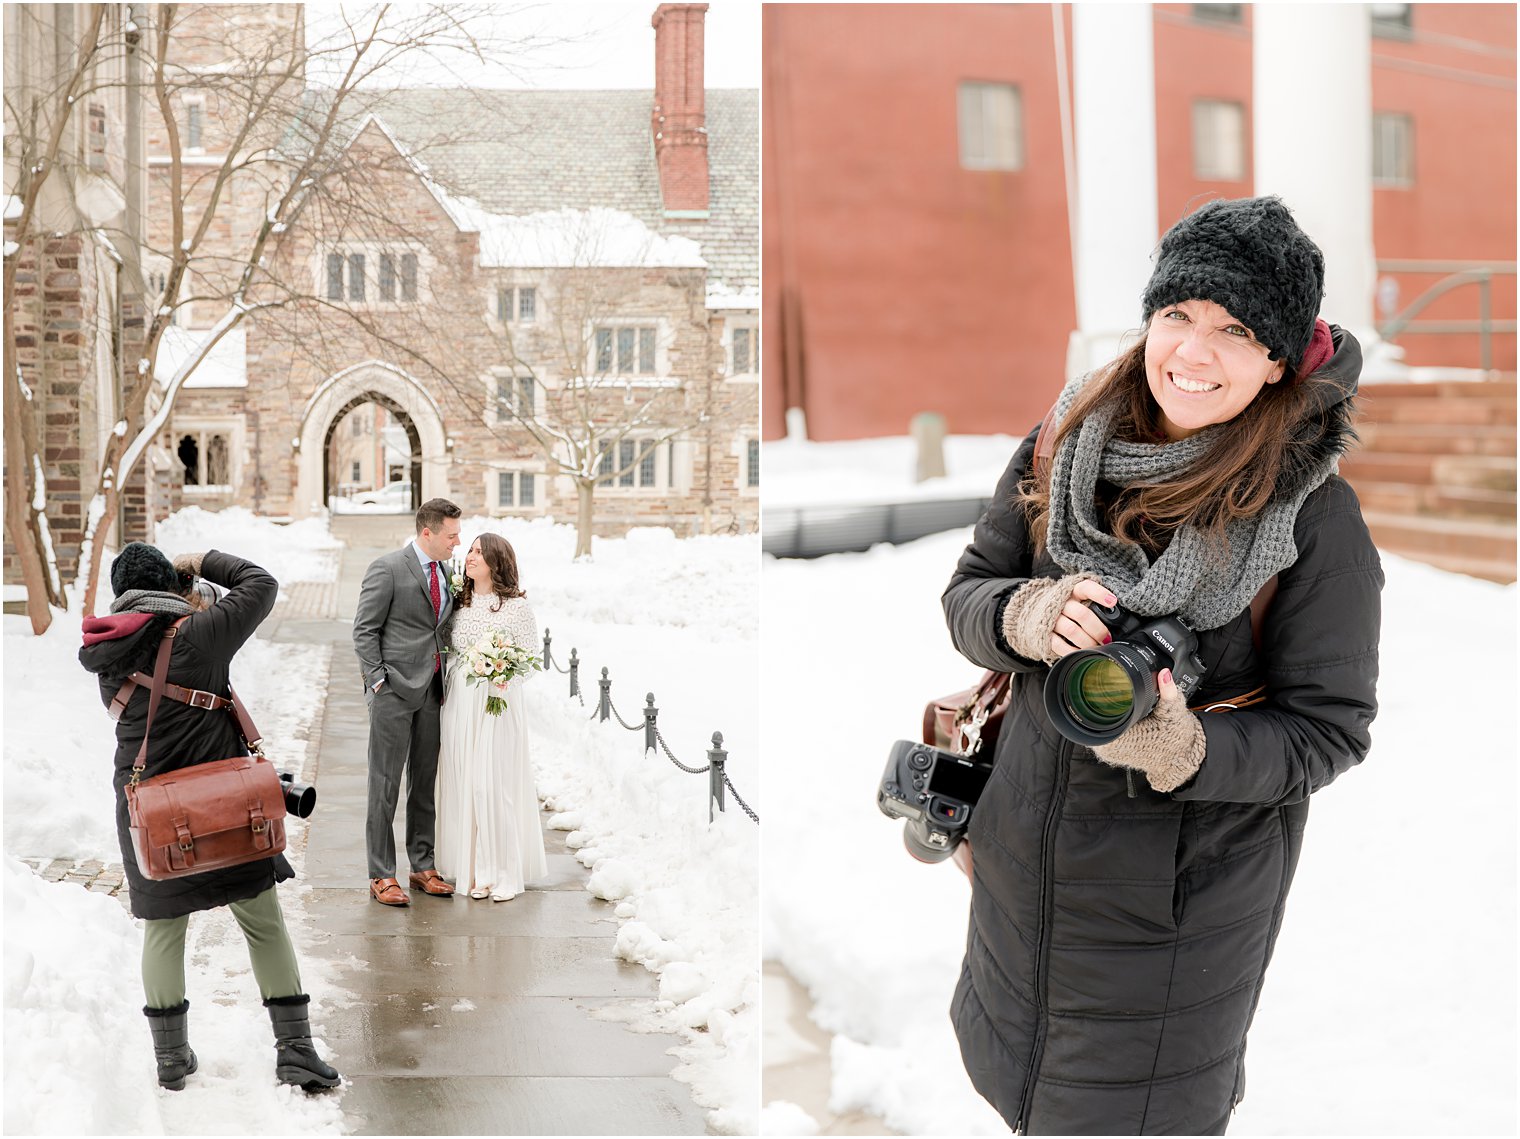 behind-the-scenes of winter wedding day at Princeton University 